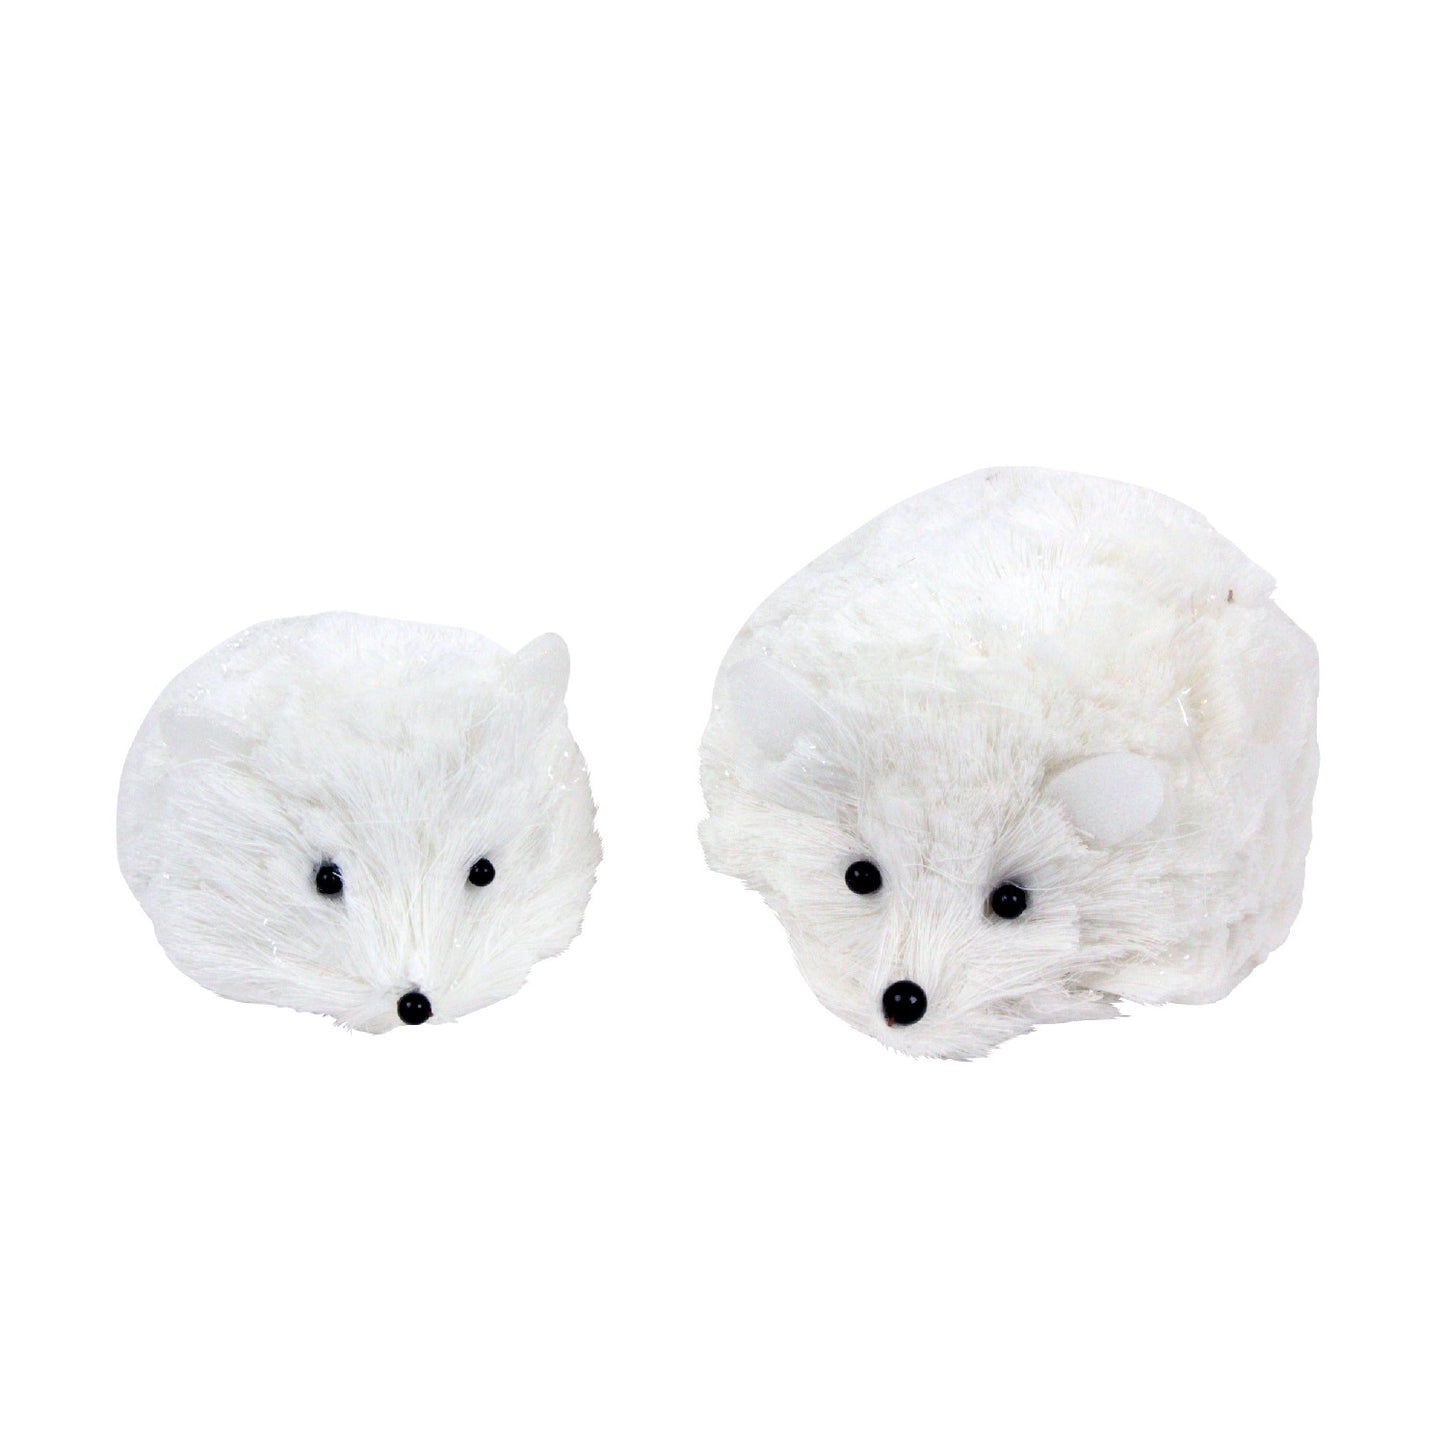 Gisela Graham Christmas White Bristle Hedgehogs Ornament Pair  Browse our beautiful range of luxury Christmas tree decorations, baubles & ornaments for your tree this Christmas.